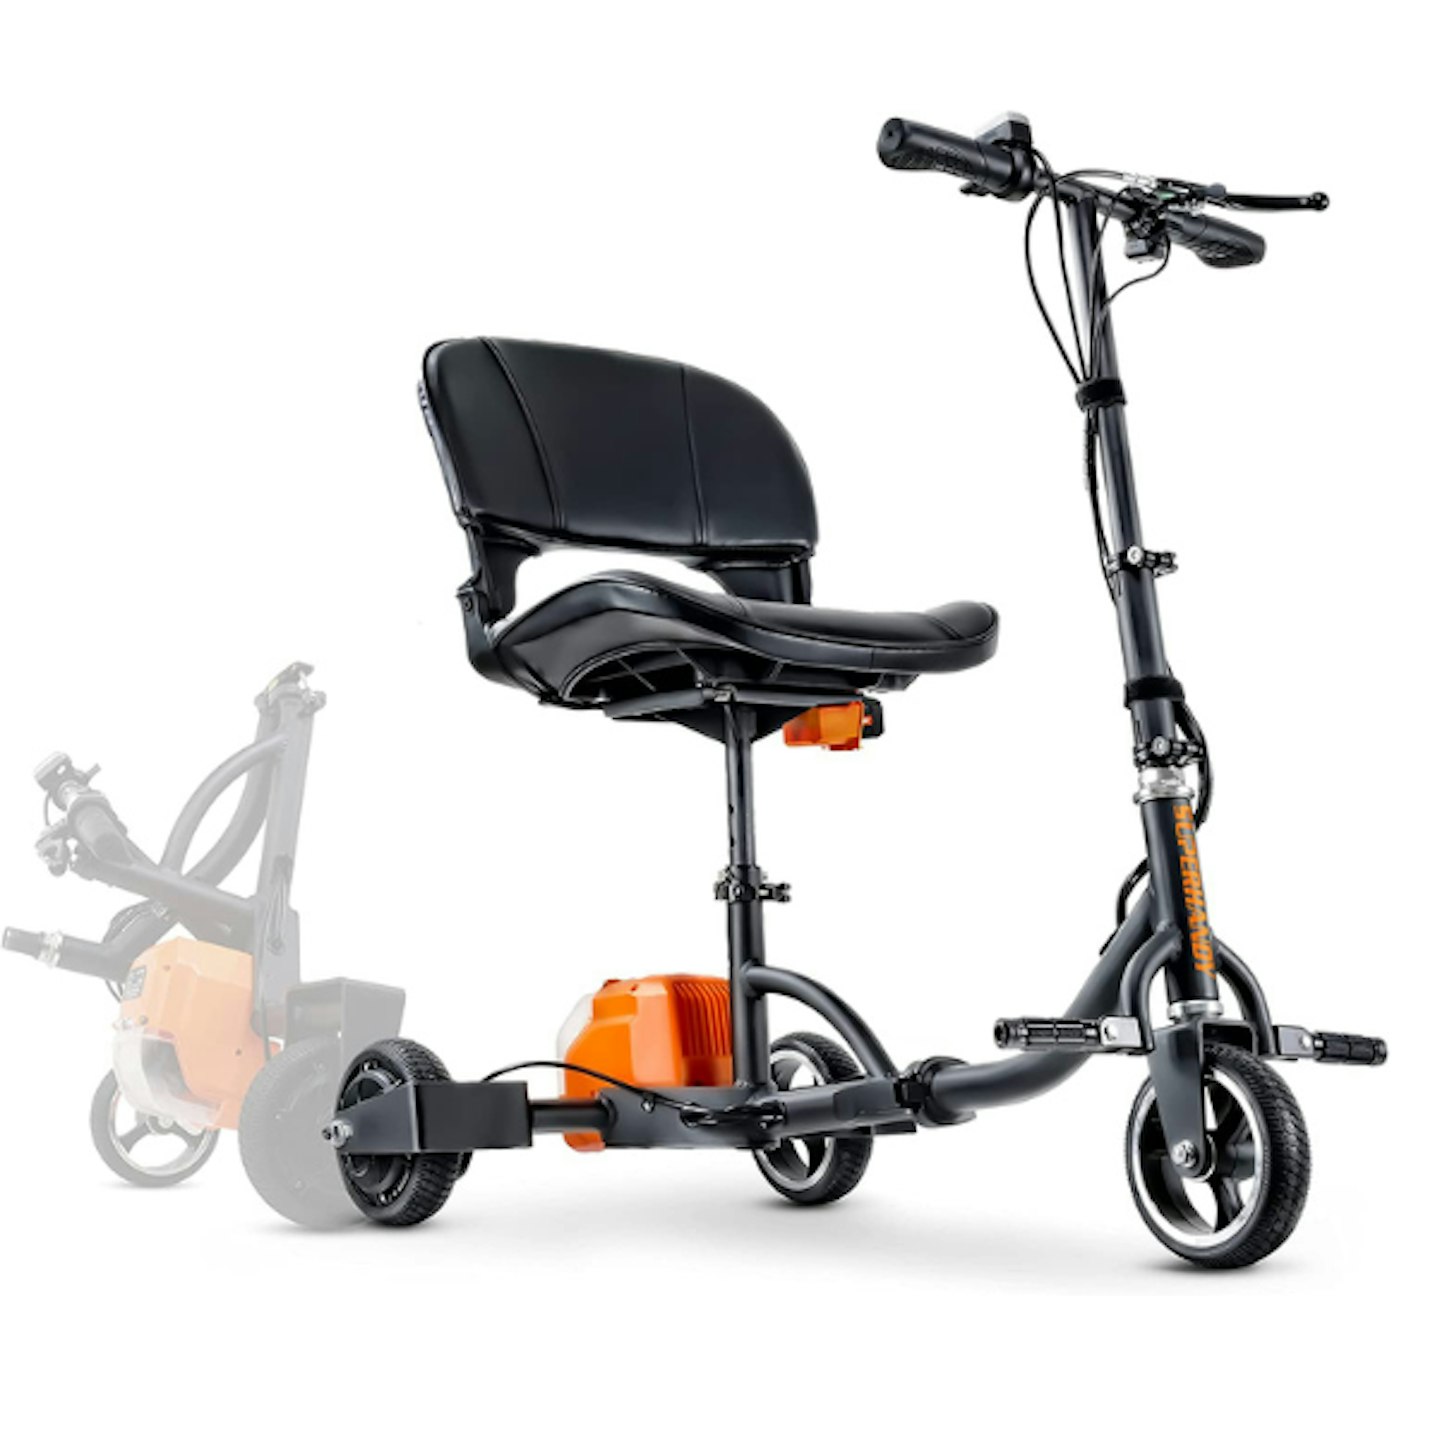 SuperHandy 3 Wheel Folding Mobility Scooter Electric Powered